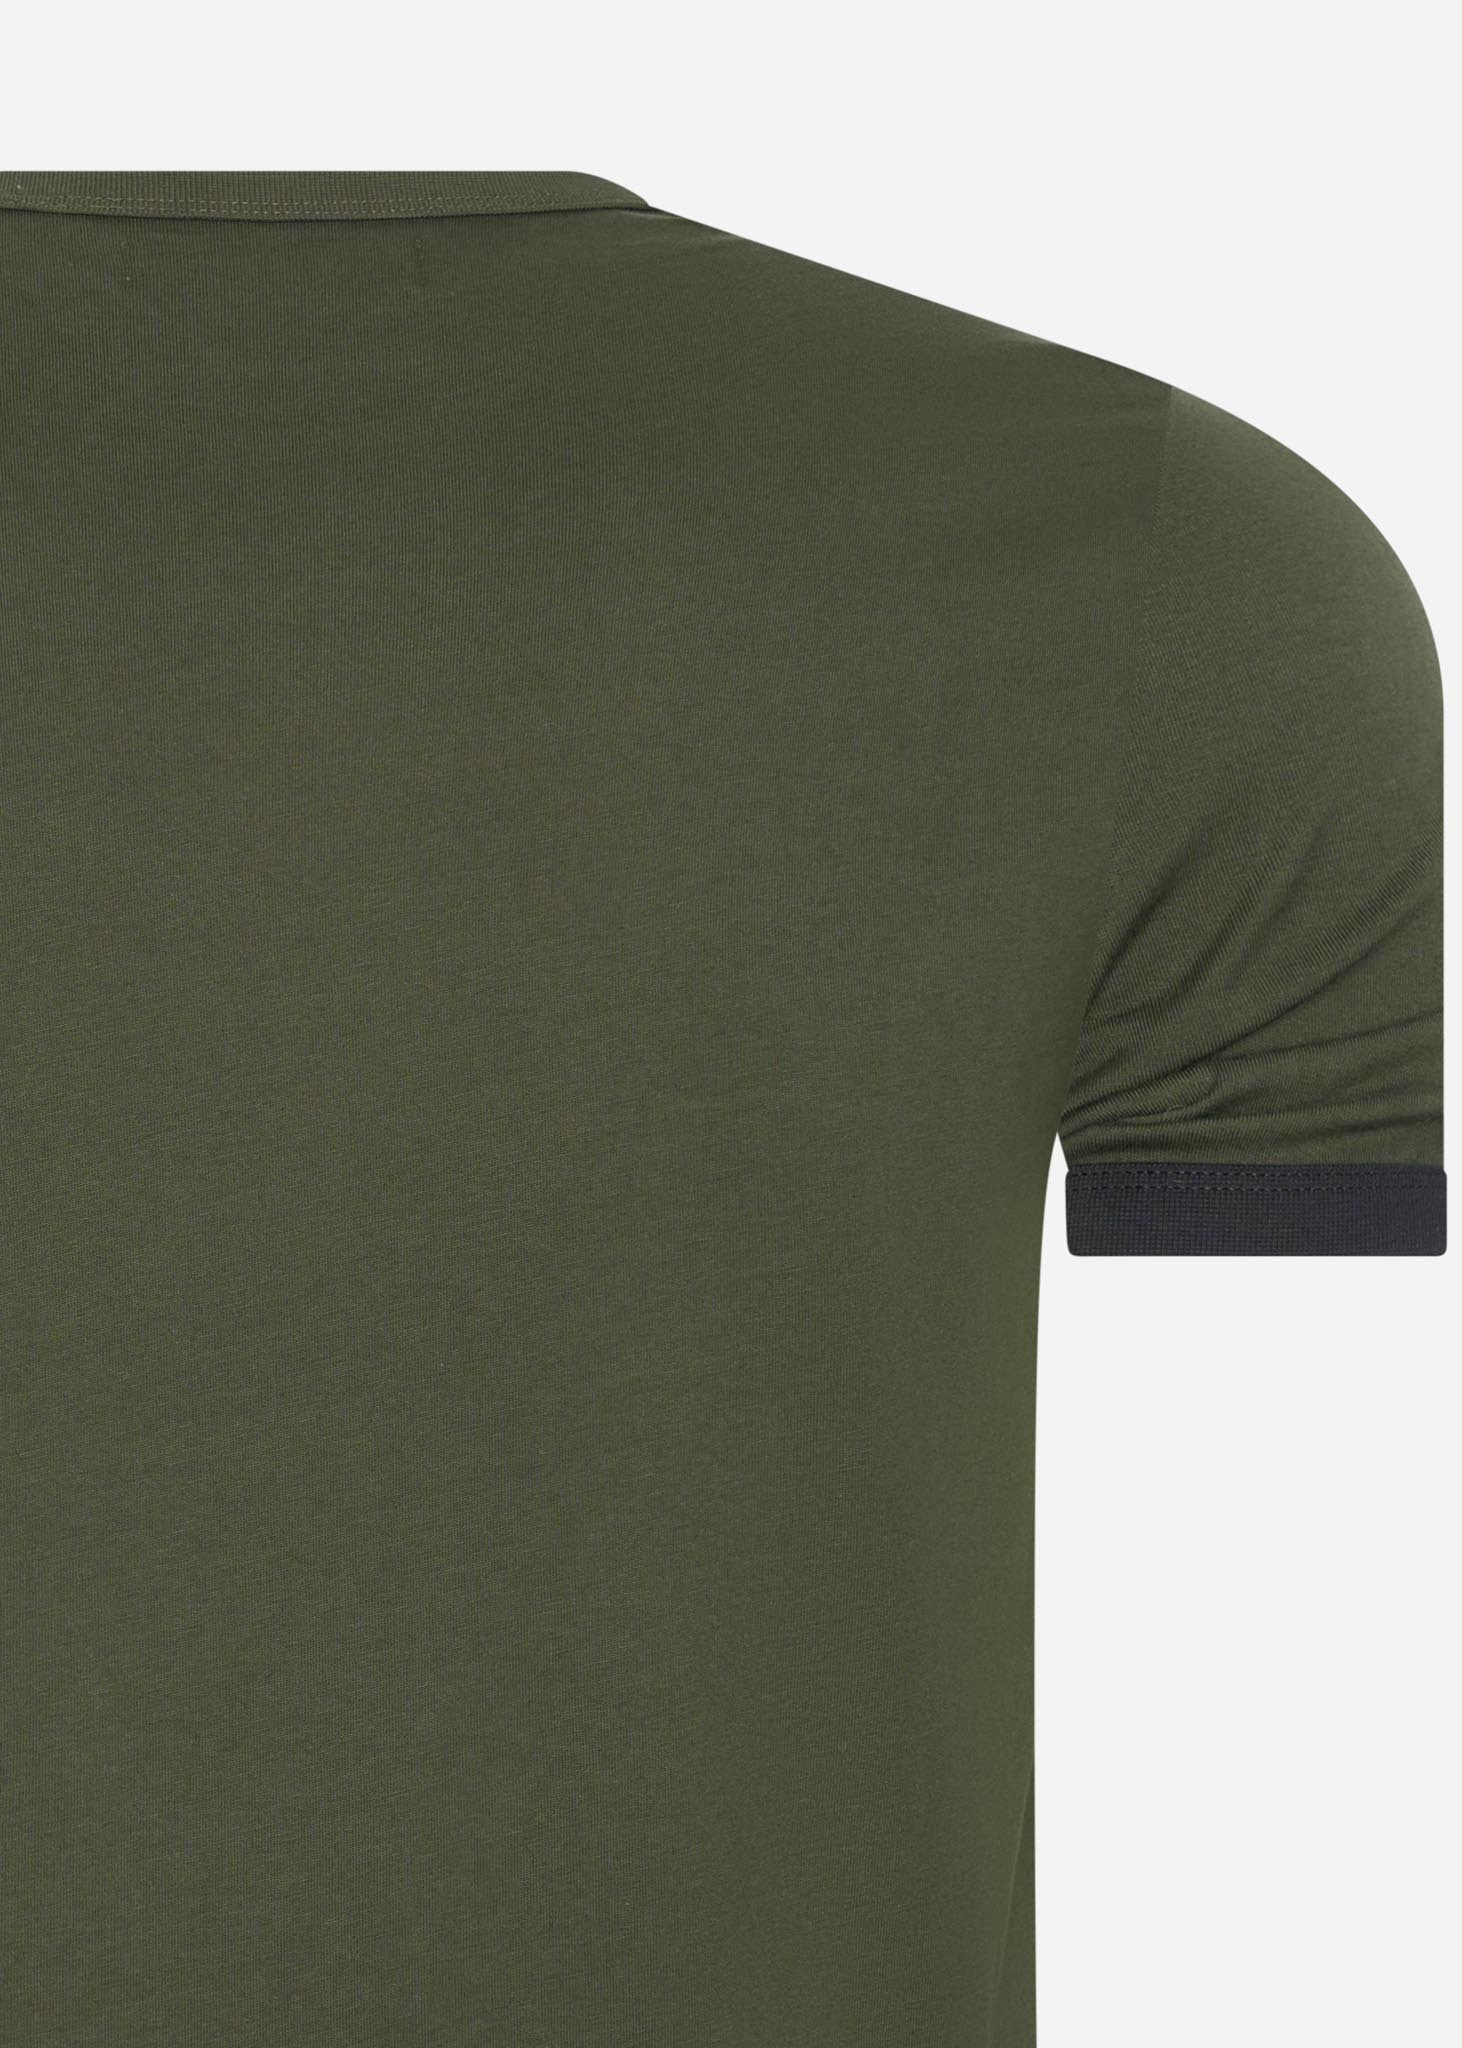 fred perry t-shirt donker groen hunting green